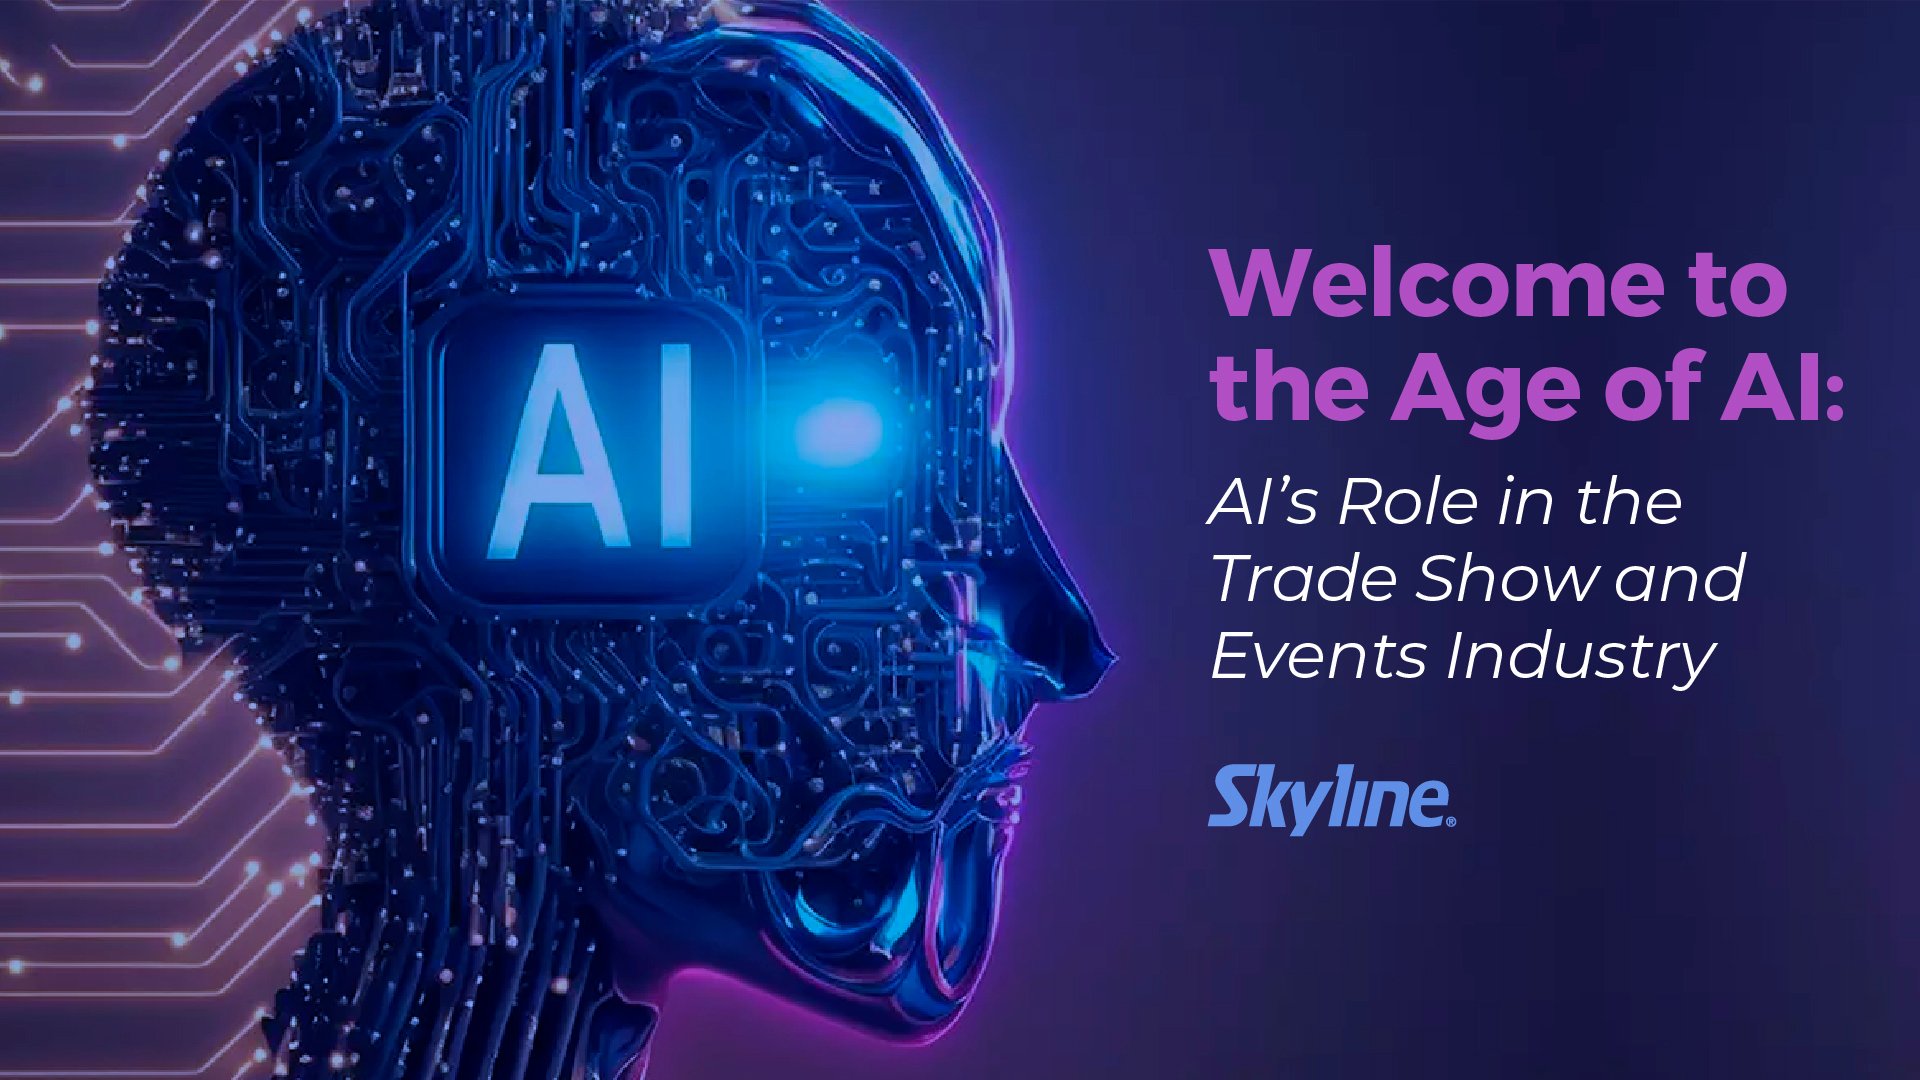  Welcome to the Age of AI: AI’s Role in the Trade Show and Events Industry 